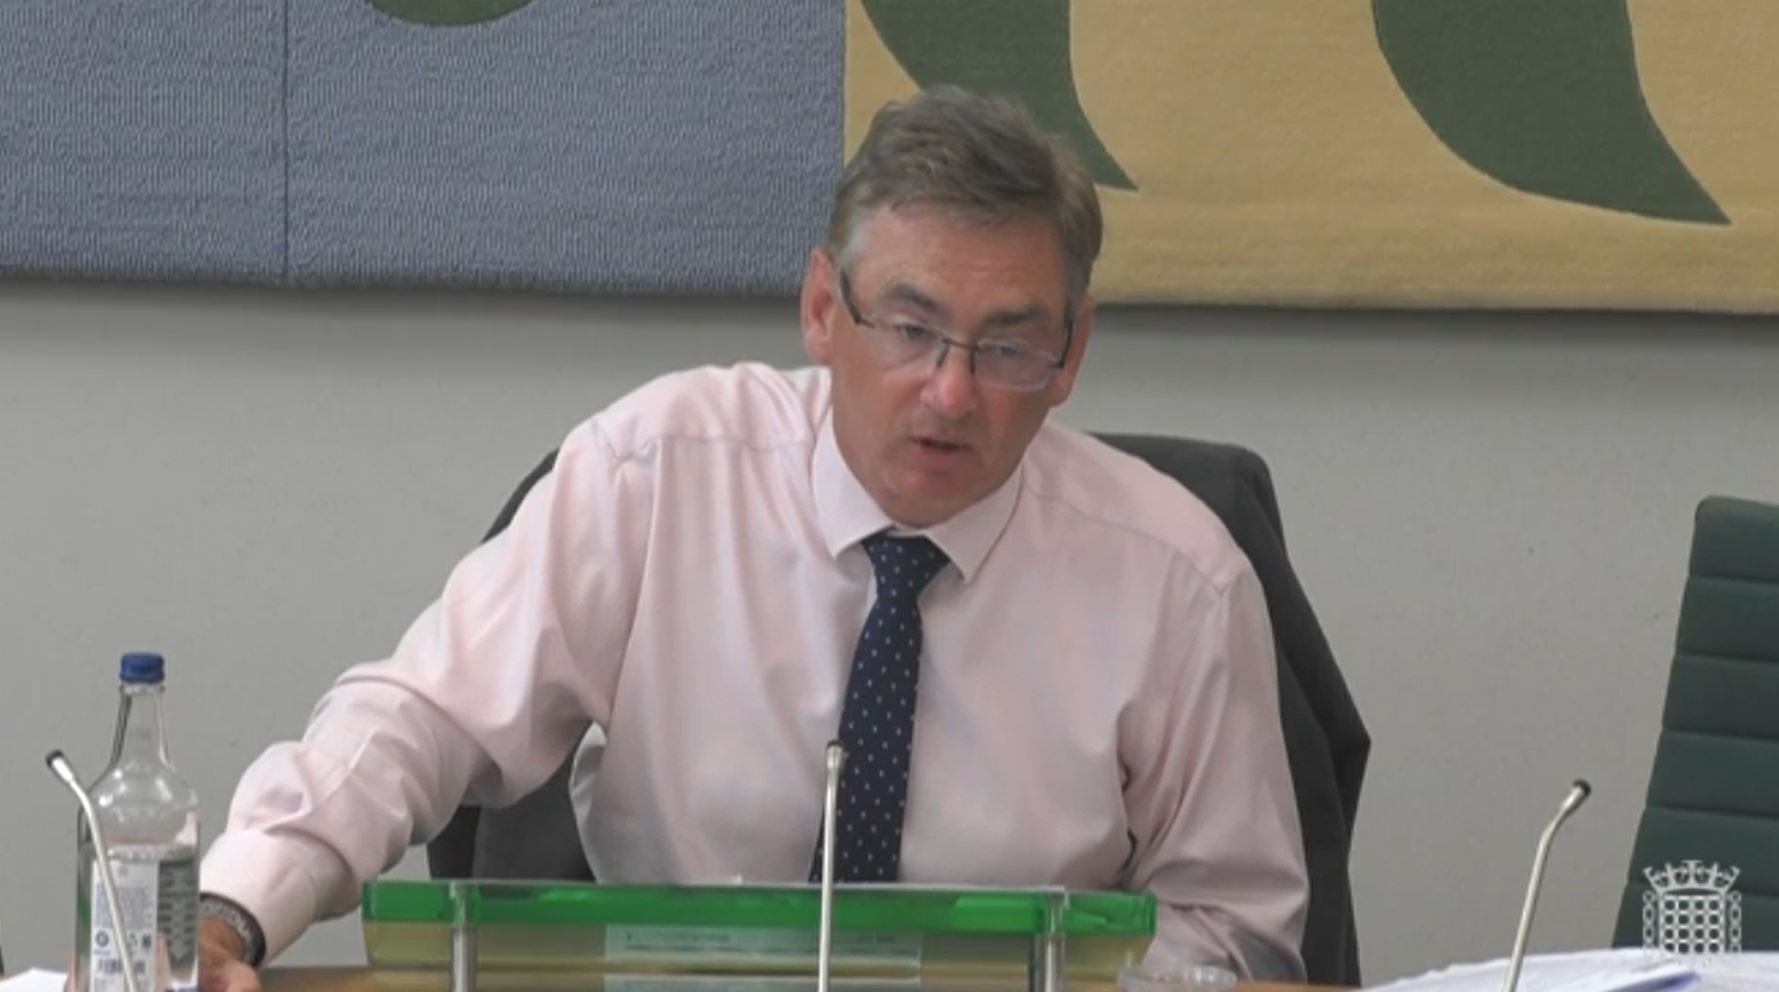 Julian Knight has called on Yorkshire to immediately publish a report into allegations of racism (House of Commons/PA)